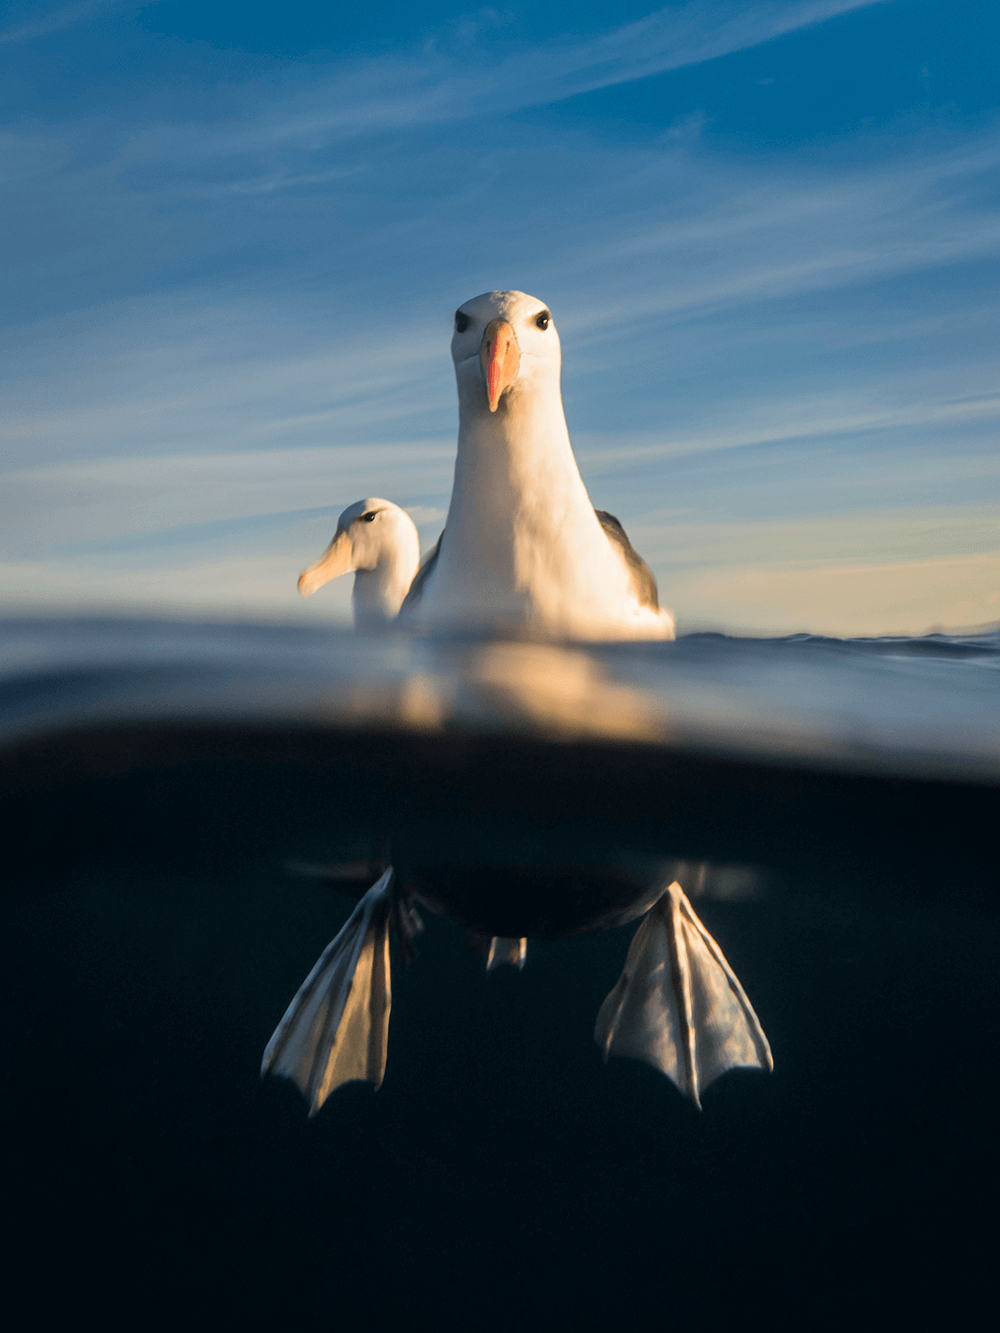 Image of a seagull by @submerged_images